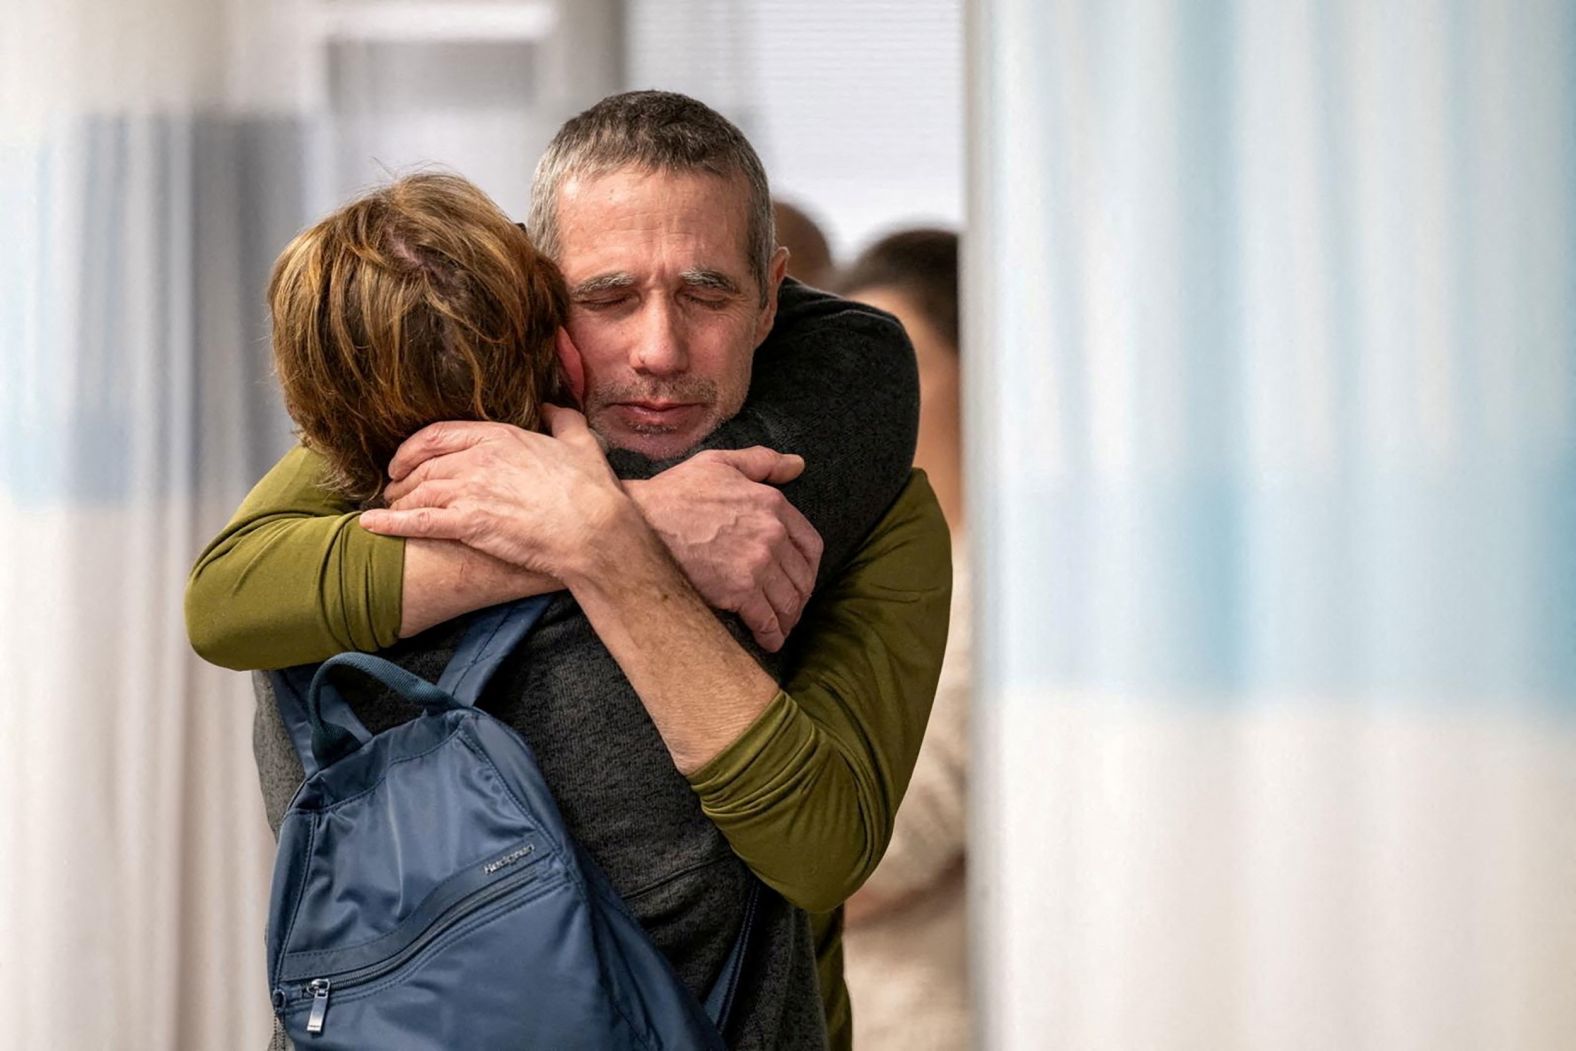 Fernando Simon Marman hugs a loved one in Ramat Gan, Israel, on Monday, February 12, after <a href="index.php?page=&url=https%3A%2F%2Fwww.cnn.com%2Fmiddleeast%2Flive-news%2Fisrael-hamas-war-gaza-news-02-12-24%2Fh_85d3d92d4175d949aff8816b661e6dff" target="_blank">he and another hostage were rescued</a> in an Israeli military raid in Rafah, Gaza. Marman, 60, and Louis Har, 70, were both taken during Hamas' October 7 attack on Israel. After the rescue, <a href="index.php?page=&url=https%3A%2F%2Fwww.cnn.com%2F2024%2F02%2F14%2Fmiddleeast%2Frafah-international-opposition-israel-ground-offensive-intl-hnk%2Findex.html" target="_blank">the total number of hostages left in Gaza was 134</a>, according to Israel Defense Forces spokesperson Daniel Hagari.